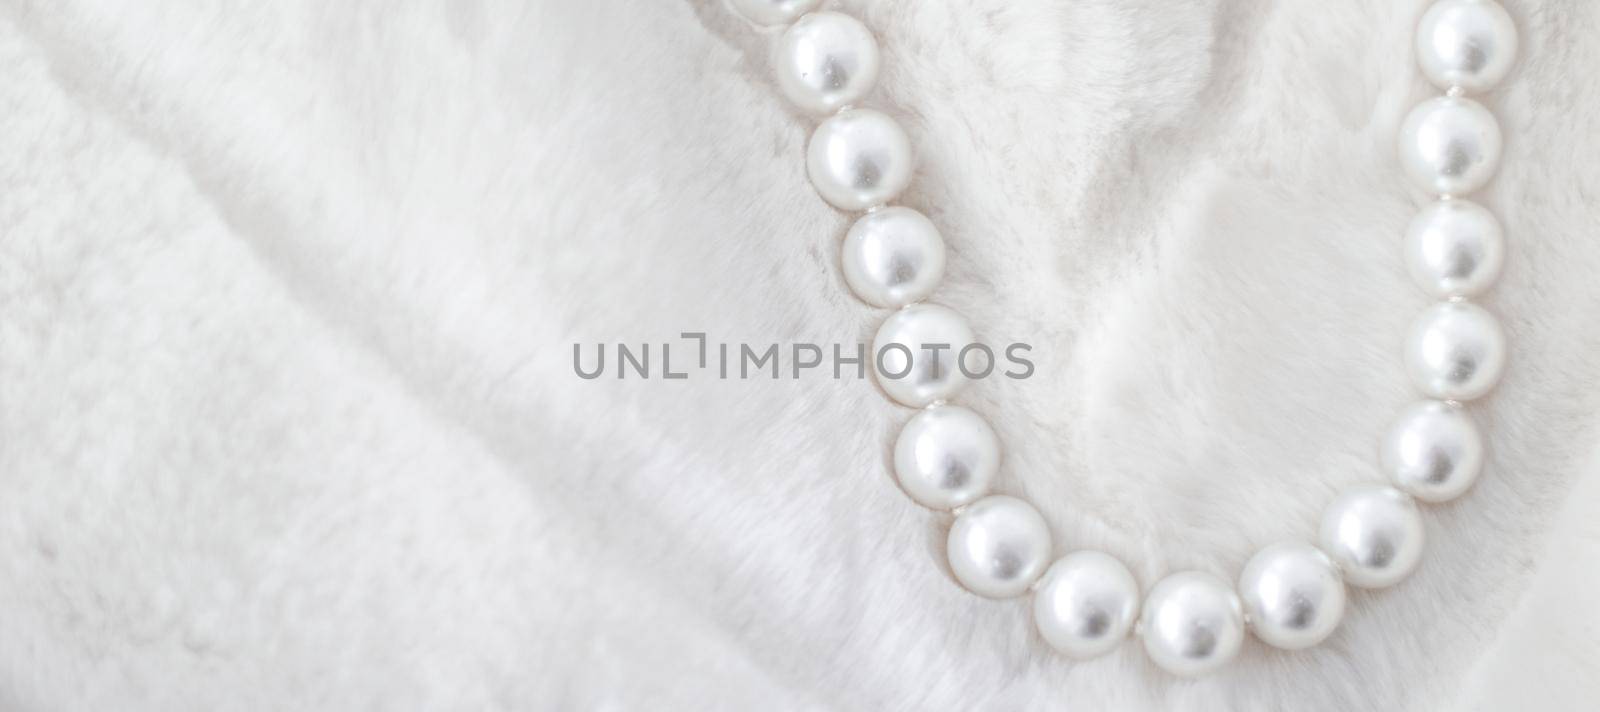 Jewelry branding, elegance and sale concept - Winter holiday jewellery fashion, pearl necklace on fur background, glamour style present and chic gift for luxury jewelery brand shopping, banner design